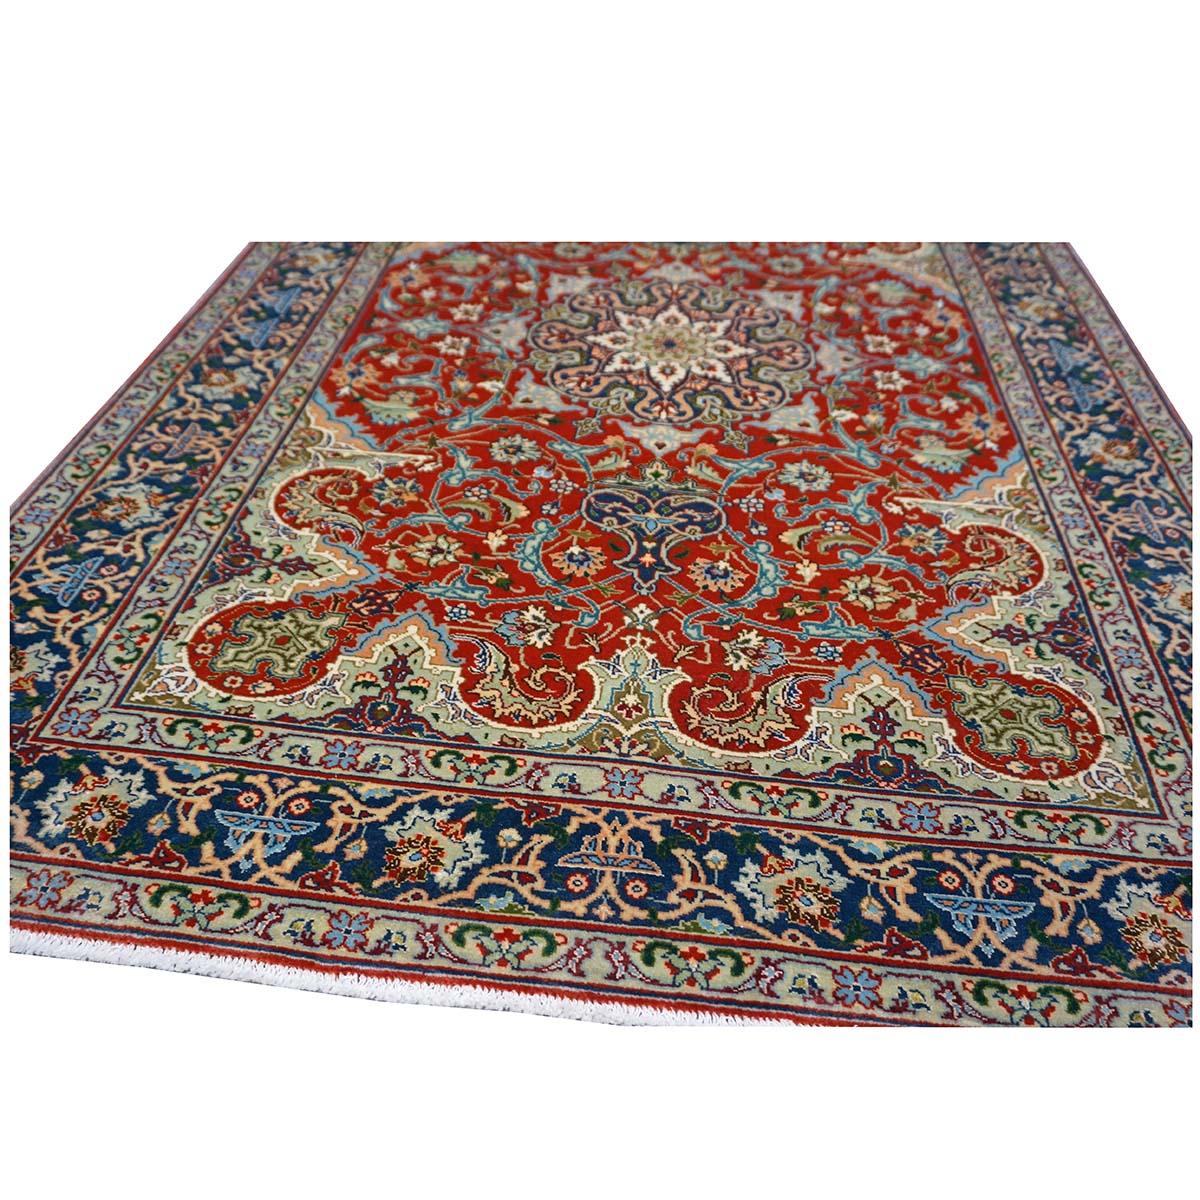 Antique 1940s Fine Persian Tabriz 3x4 Red, Navy, & Blue Handmade Area Rug For Sale 3